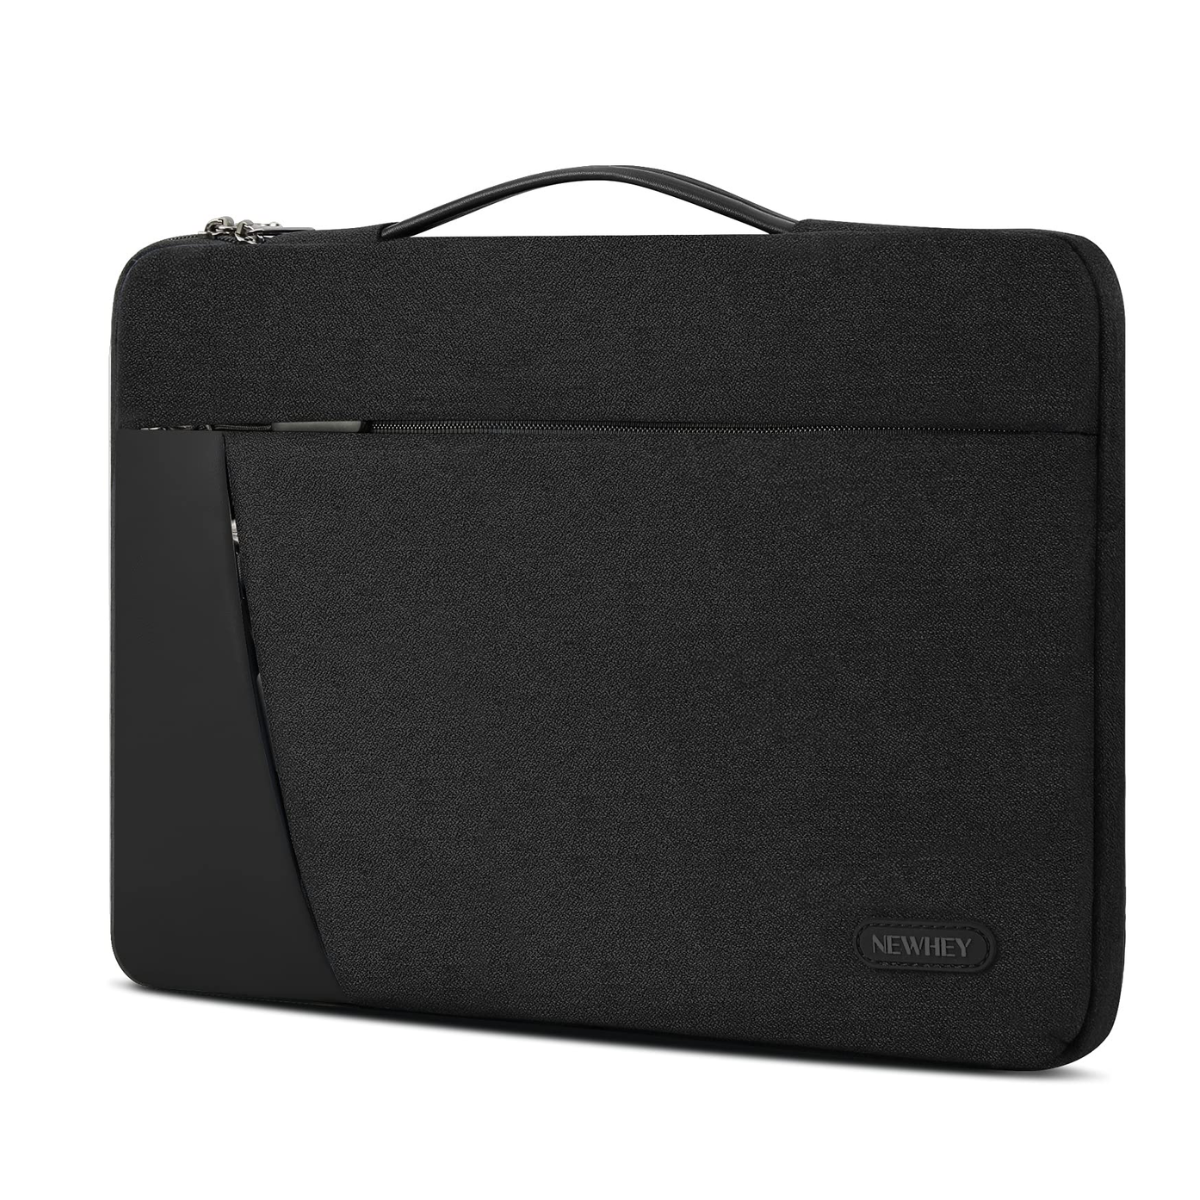 22. Stylish Laptop Bag: The Perfect Anniversary Gift for Him, Combining Tradition and Modernity